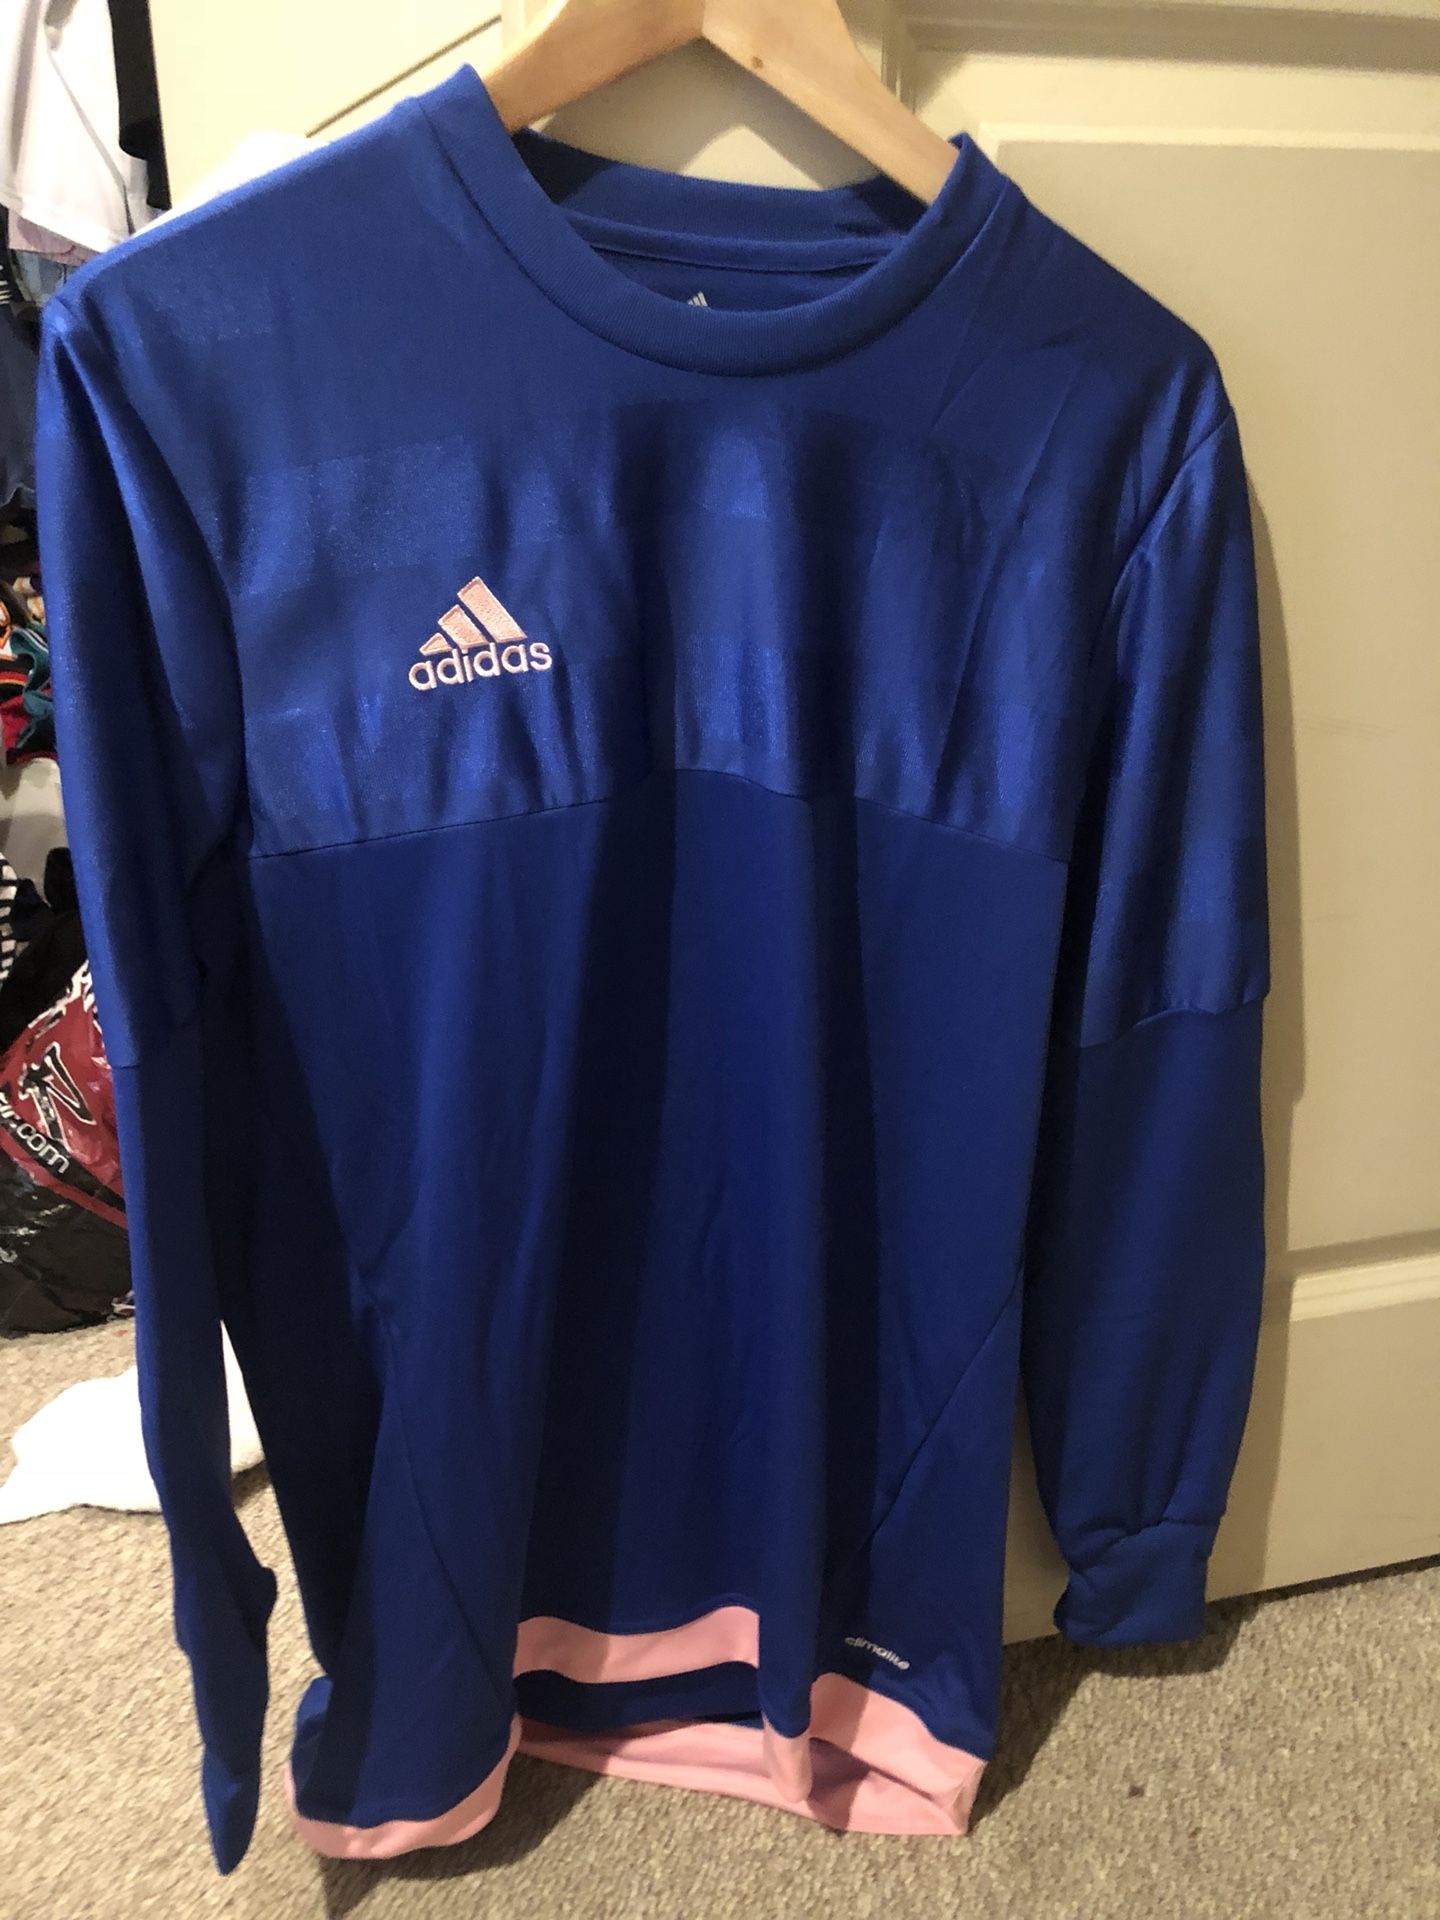 Adidas climacool soccer jersey NEVER WORN SIZE M